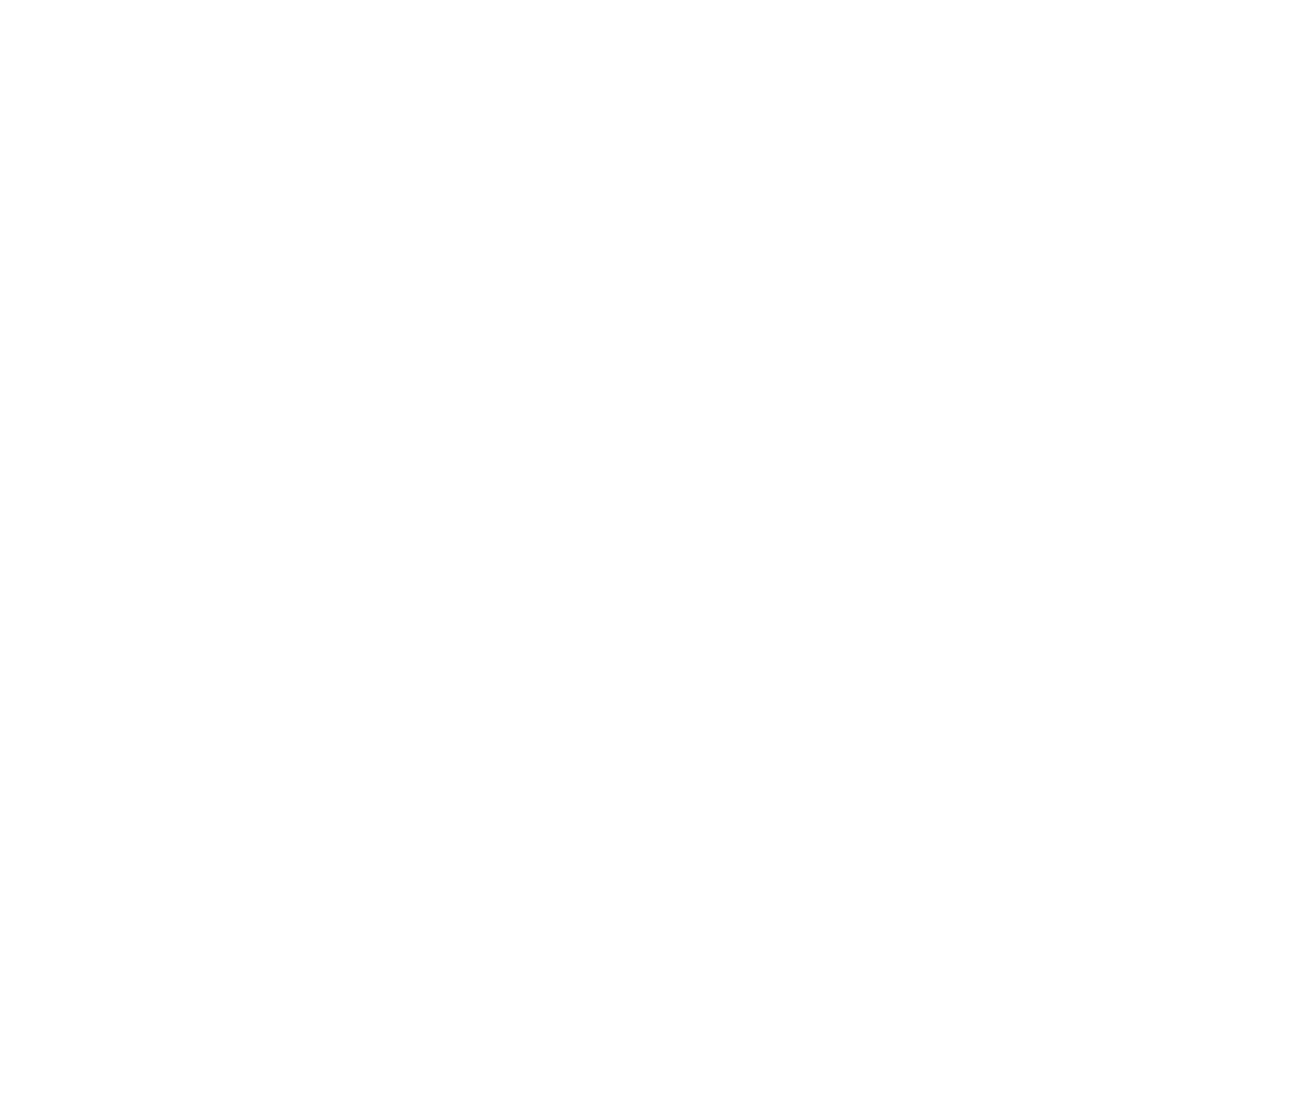 Students are encouraged to put their fruit and vegetable scraps in the compost bins at recess and lunch.